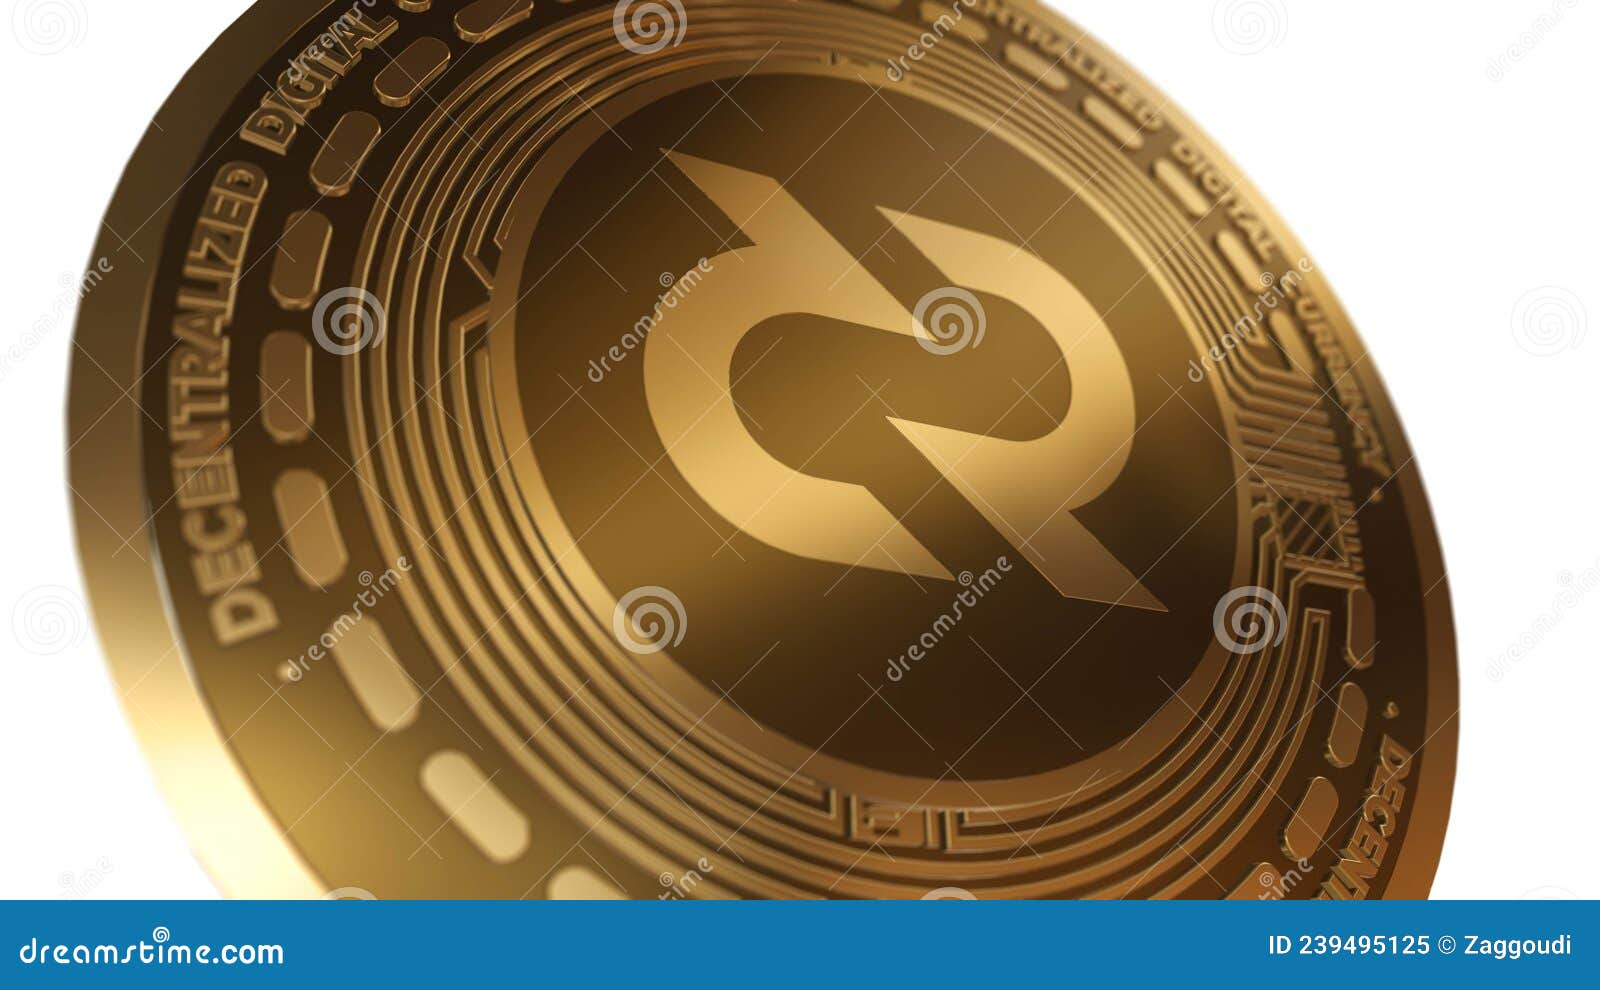 3d render golden decred dcr cryptocurrency coin  close up view